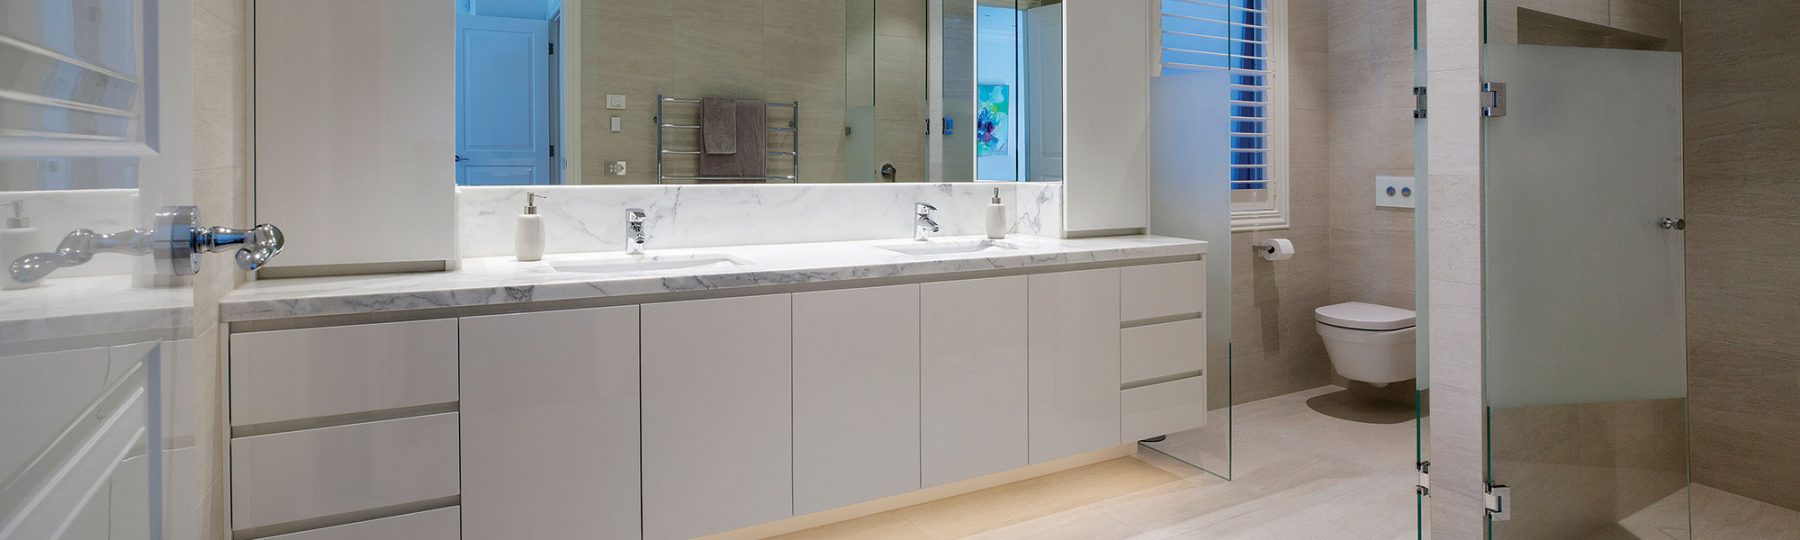 bathroom cabinets by H&H Cabinets